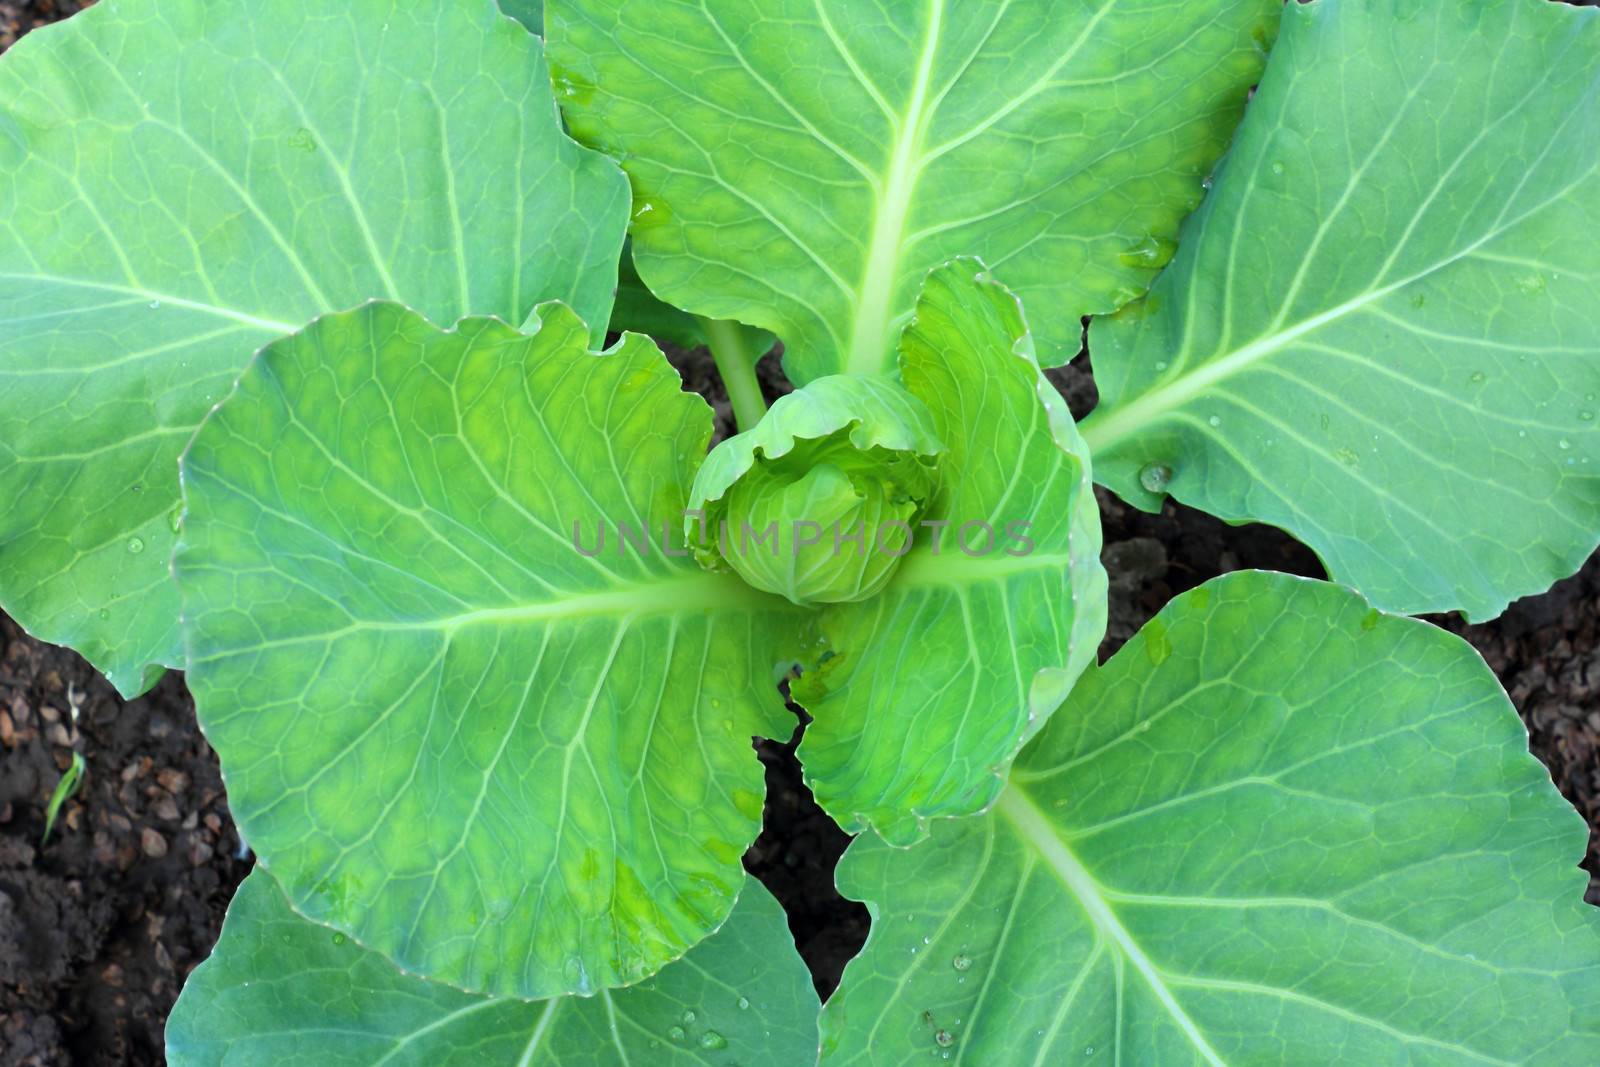 Growing in the garden green cabbage